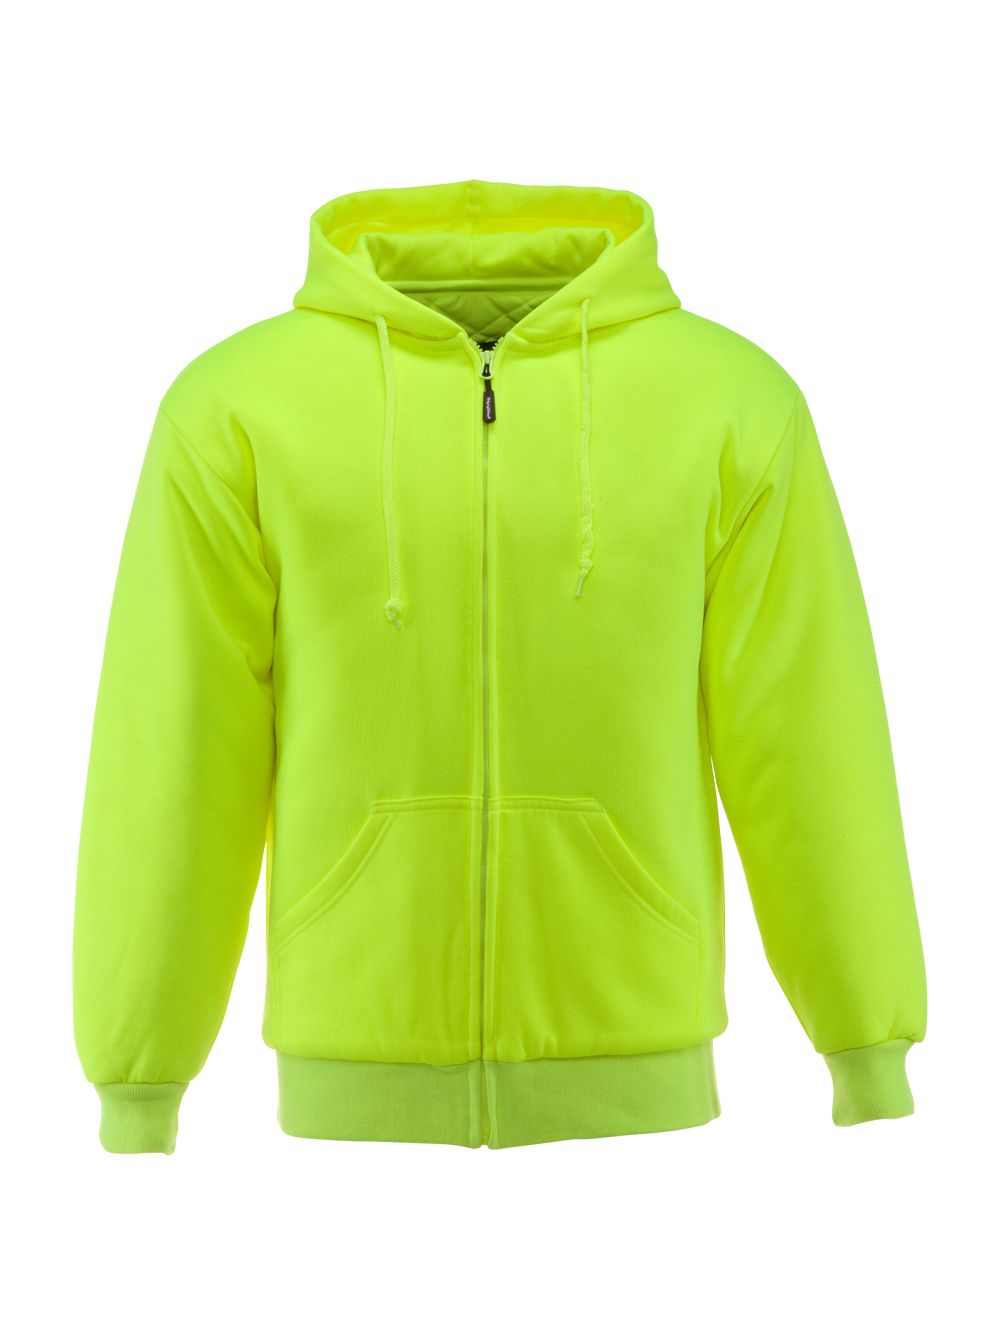 RefrigiWear HiVis Insulated Quilted Sweatshirt | Lime | Fit: Big & Tall | Ragg Wool/Polyester/Fabric | XL